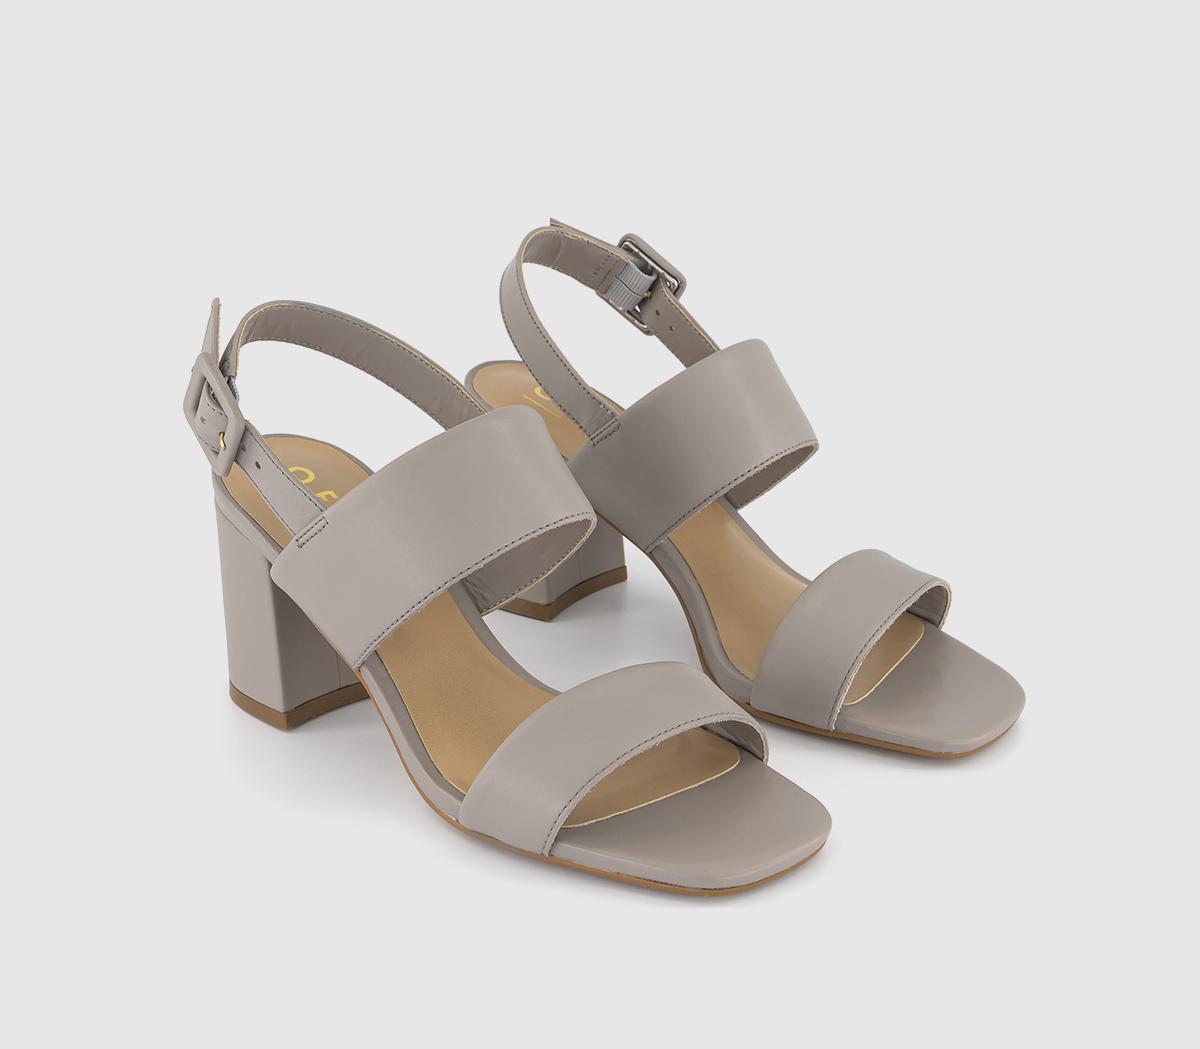 OFFICE Womens Madeline Two Part Block Heels Grey Leather, 5